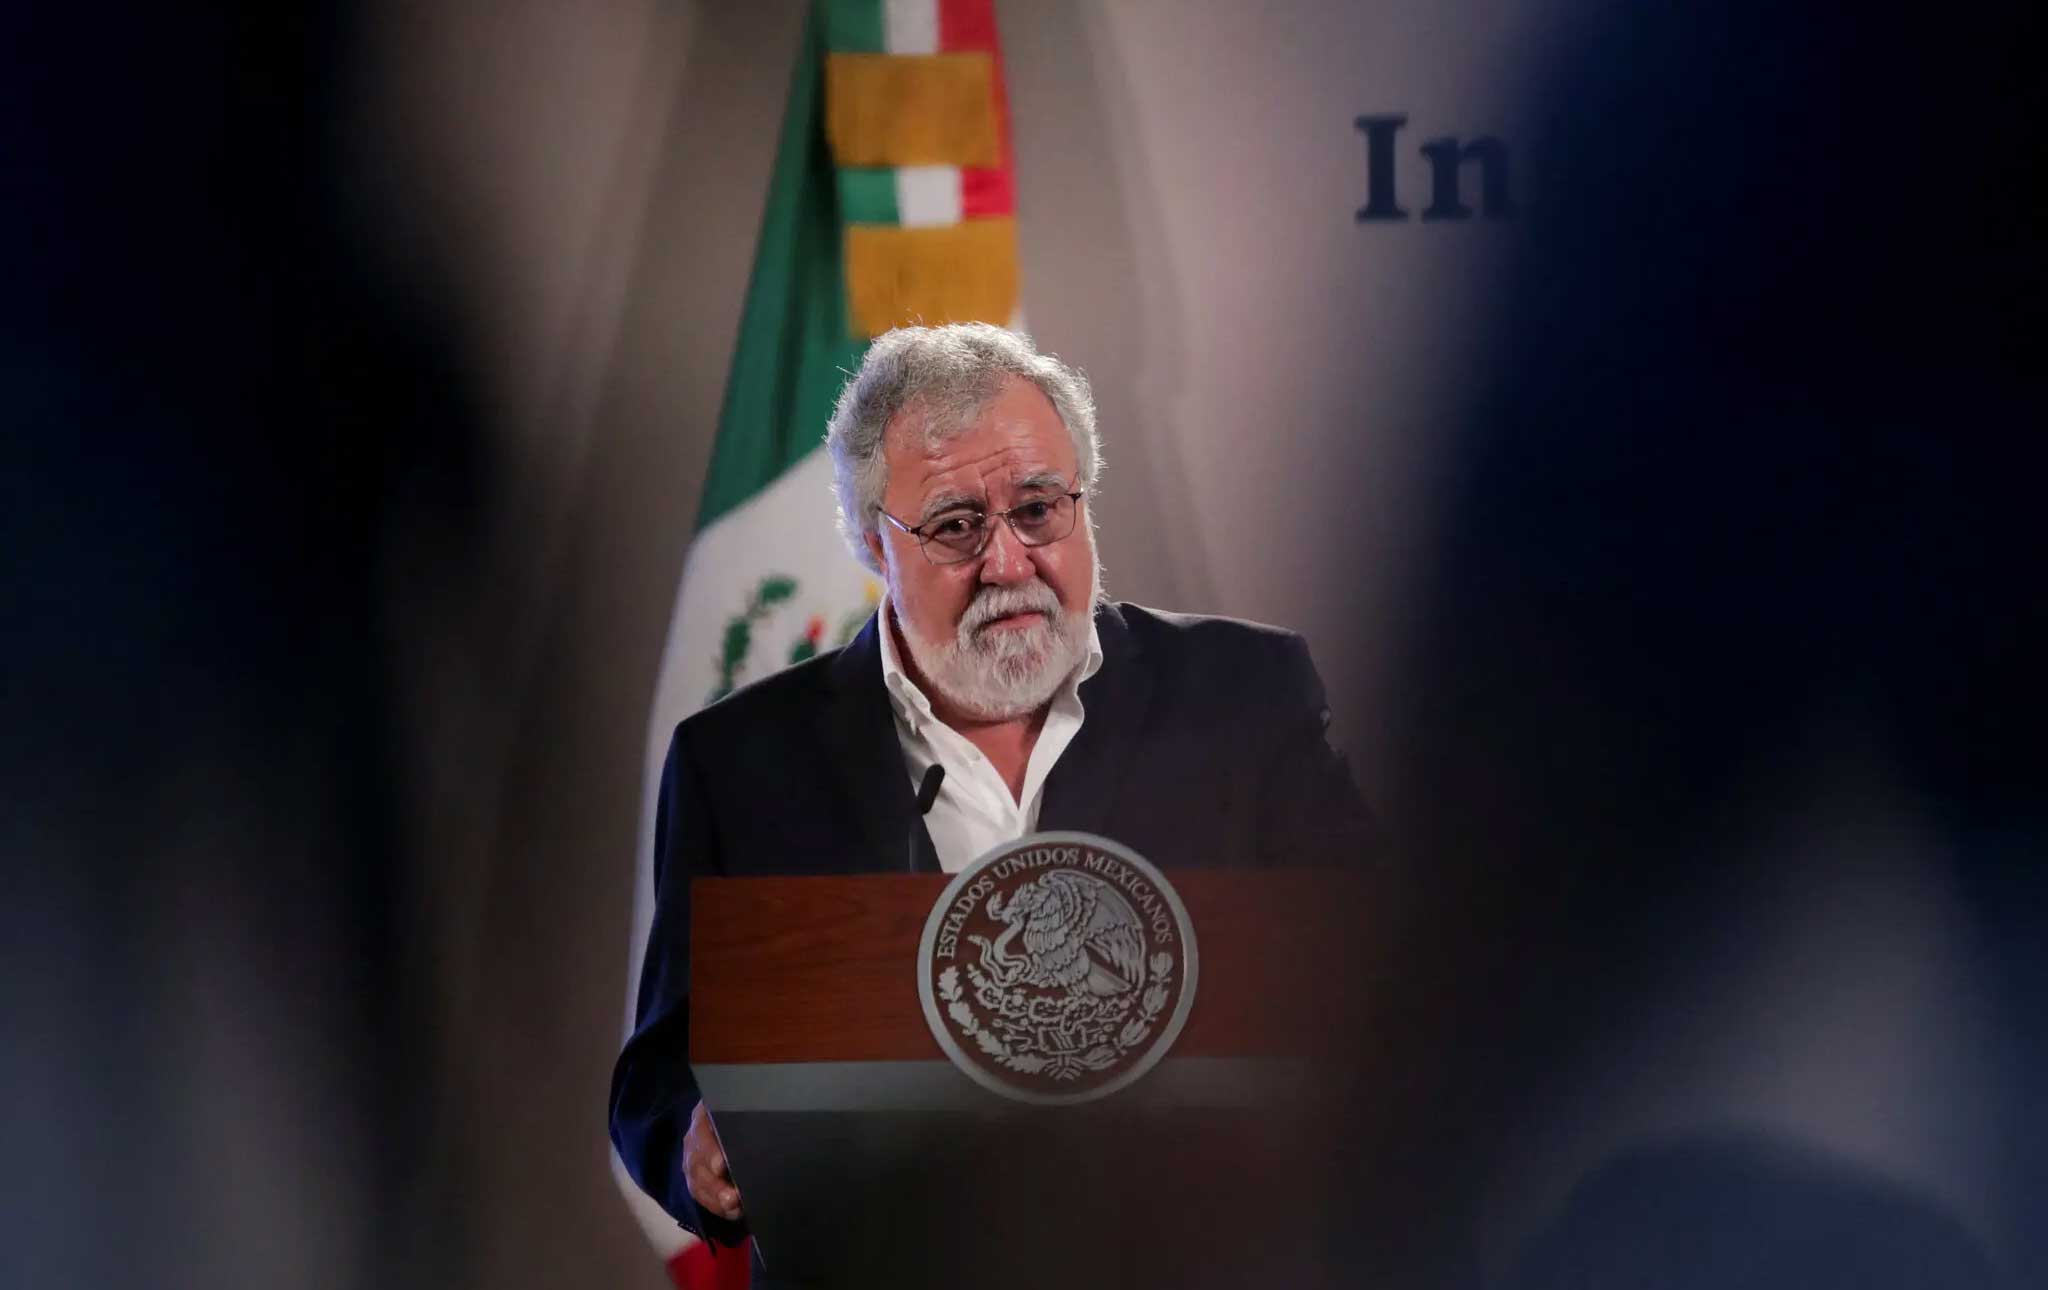 Espionage in Mexico claims a new victim: an ally of the president